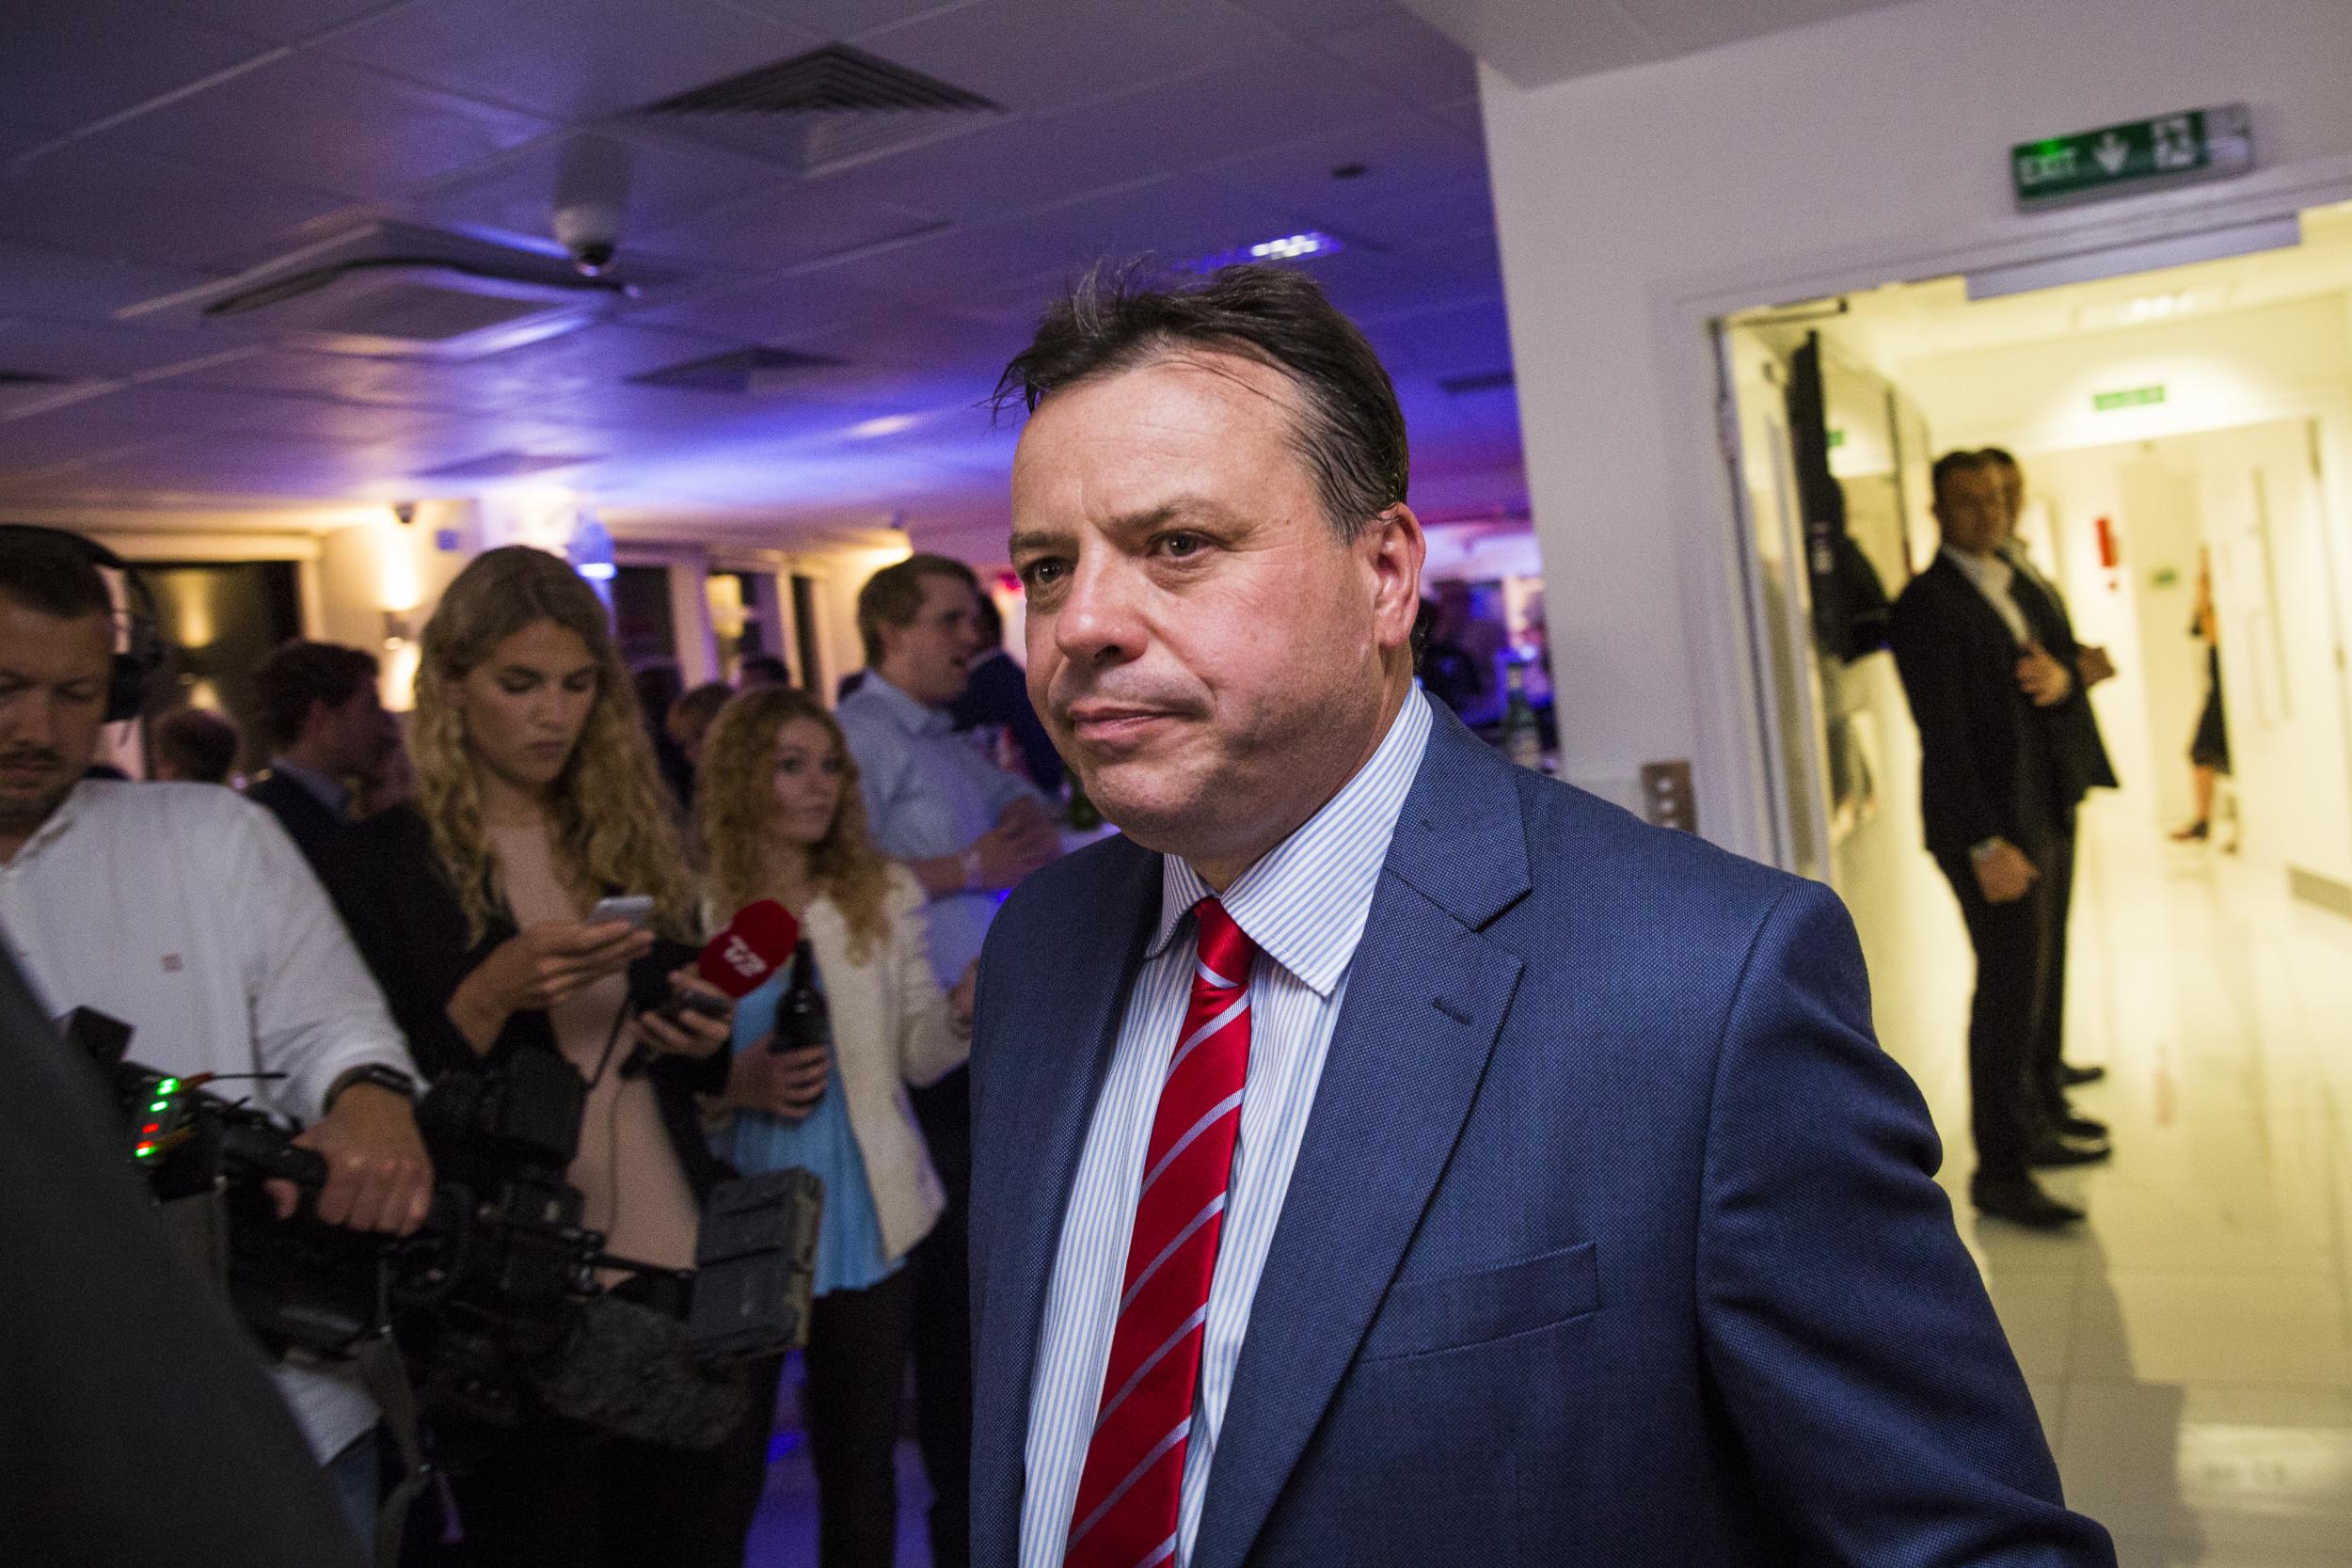 Arron Banks has taken to Twitter to say the reported wave of racism following the EU vote is 'rubbish'